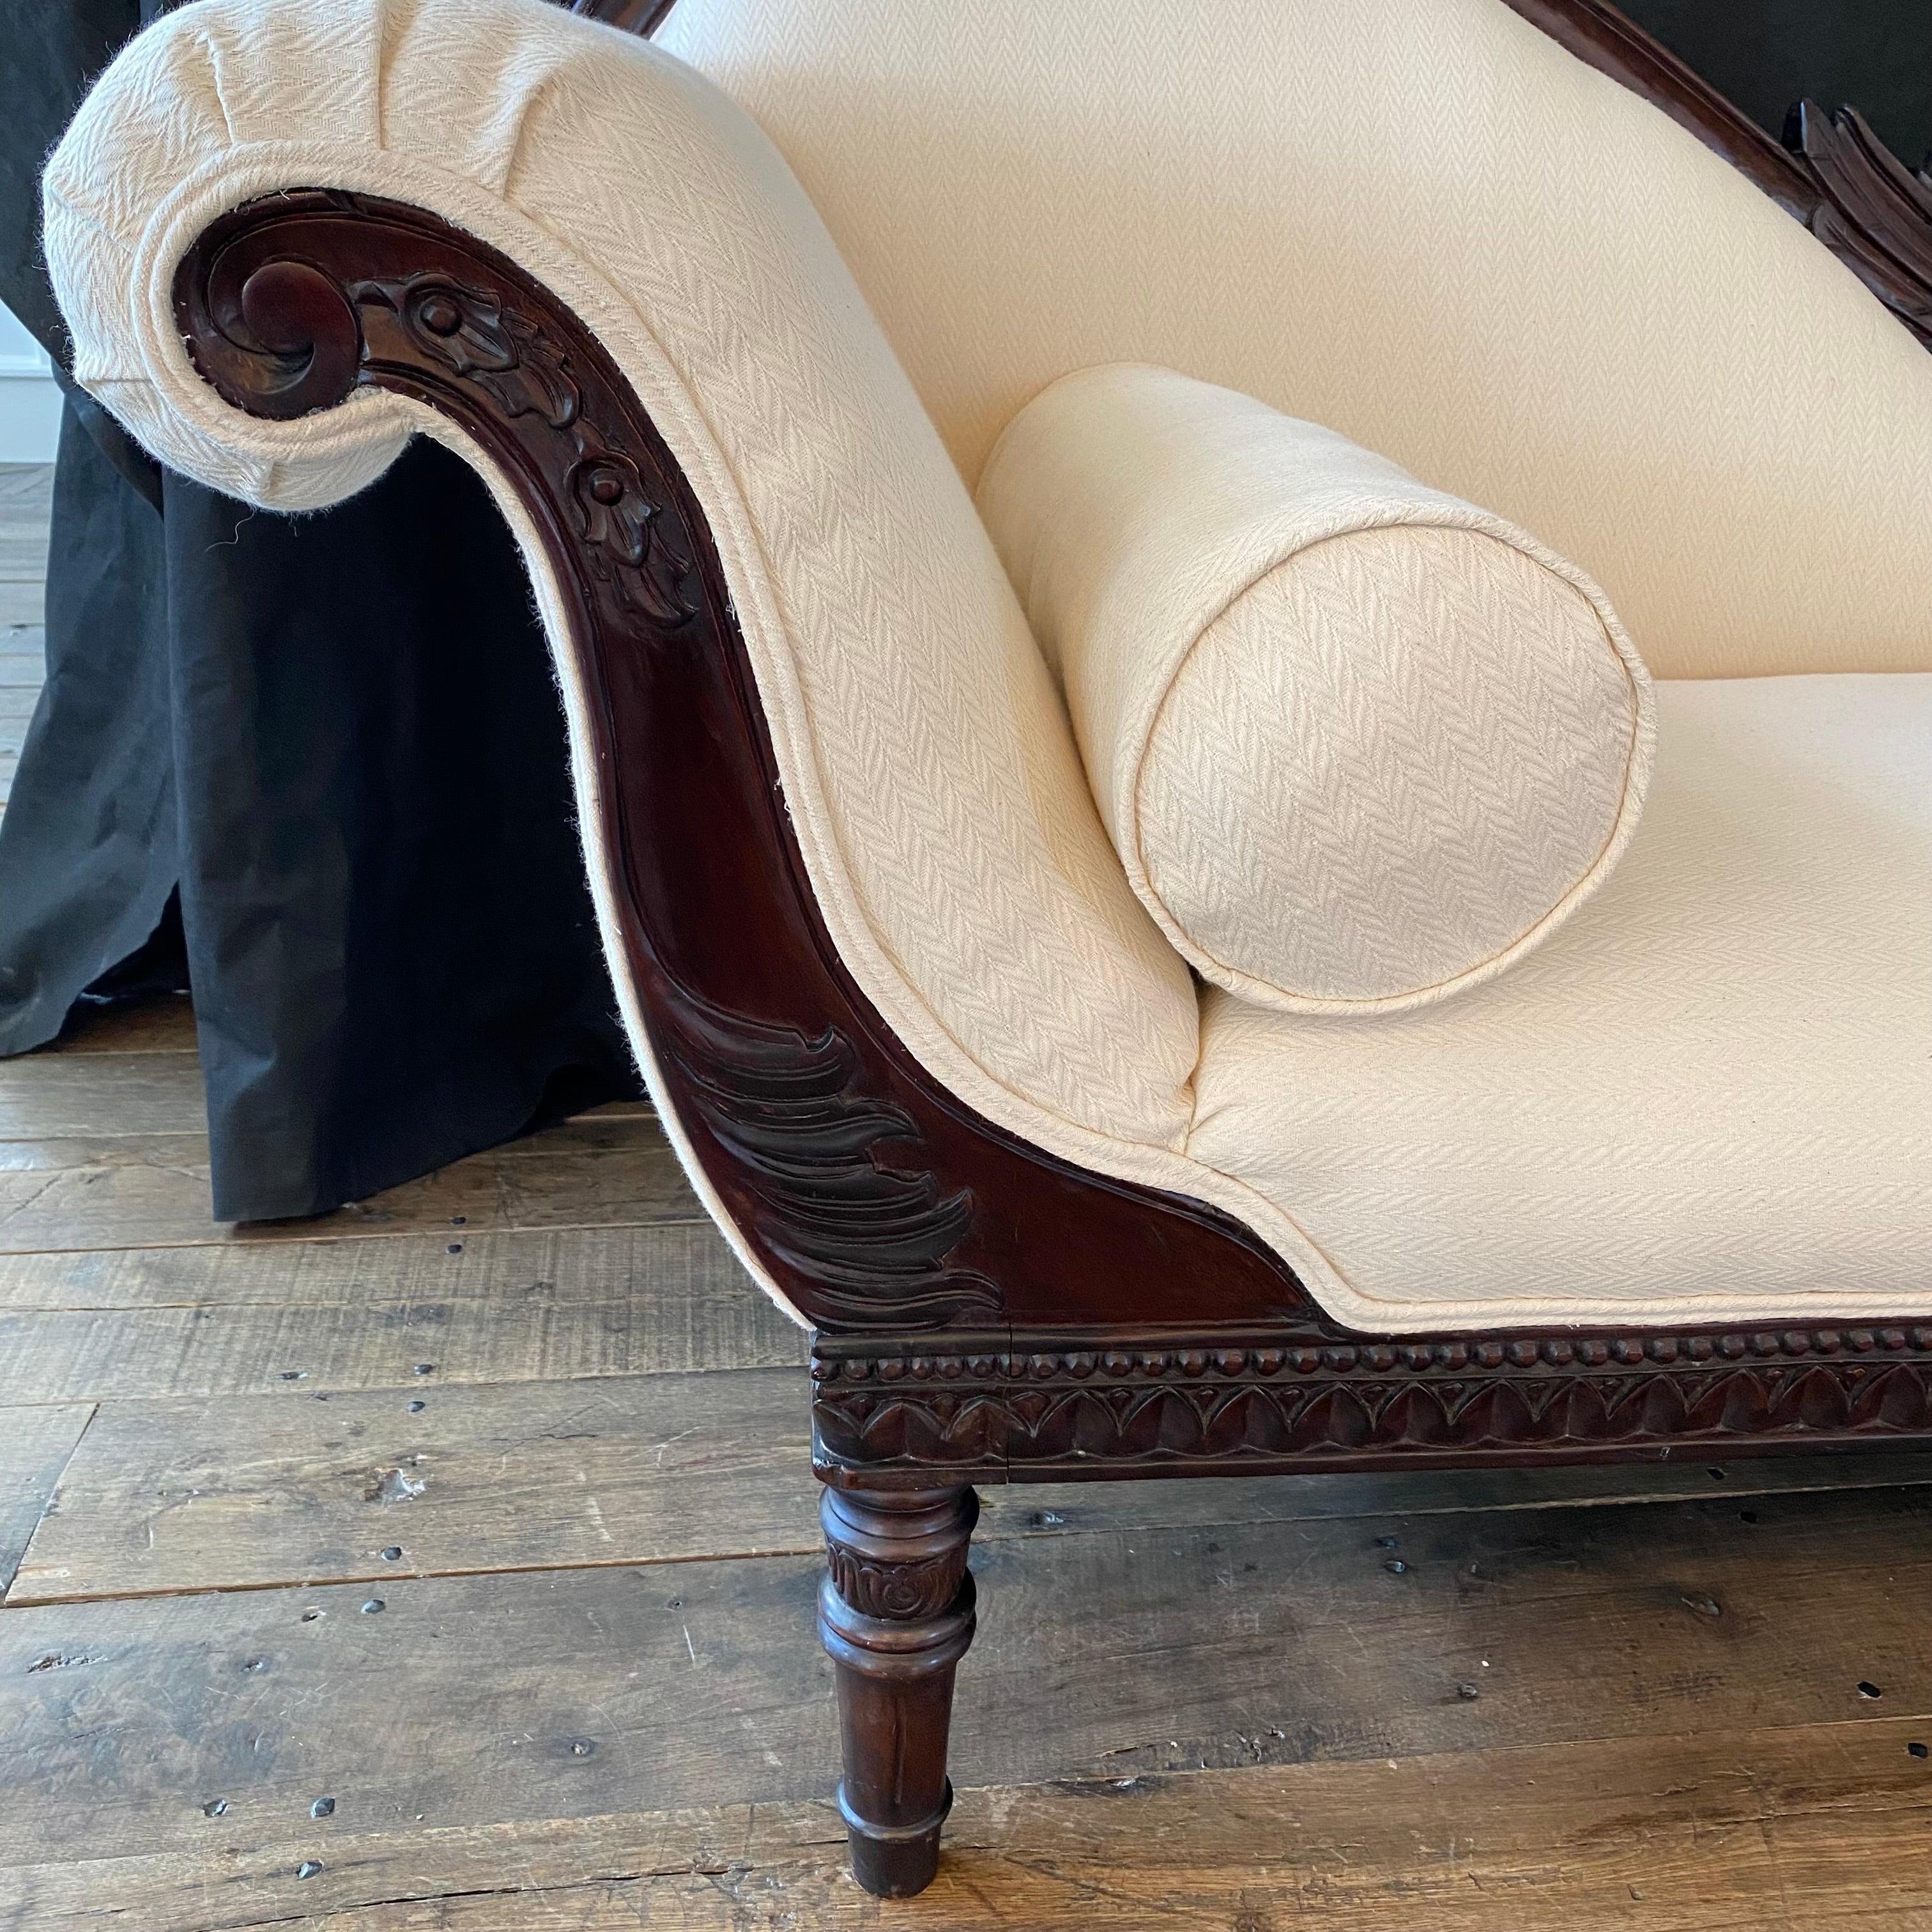 Early 19th century French Empire recamier, chaise longue, or daybed featuring an intricately carved swan on both the front and the back. Crafted from lovely solid walnut with neoclassical motifs of rosettes and acanthus leaves. The lounge is newly